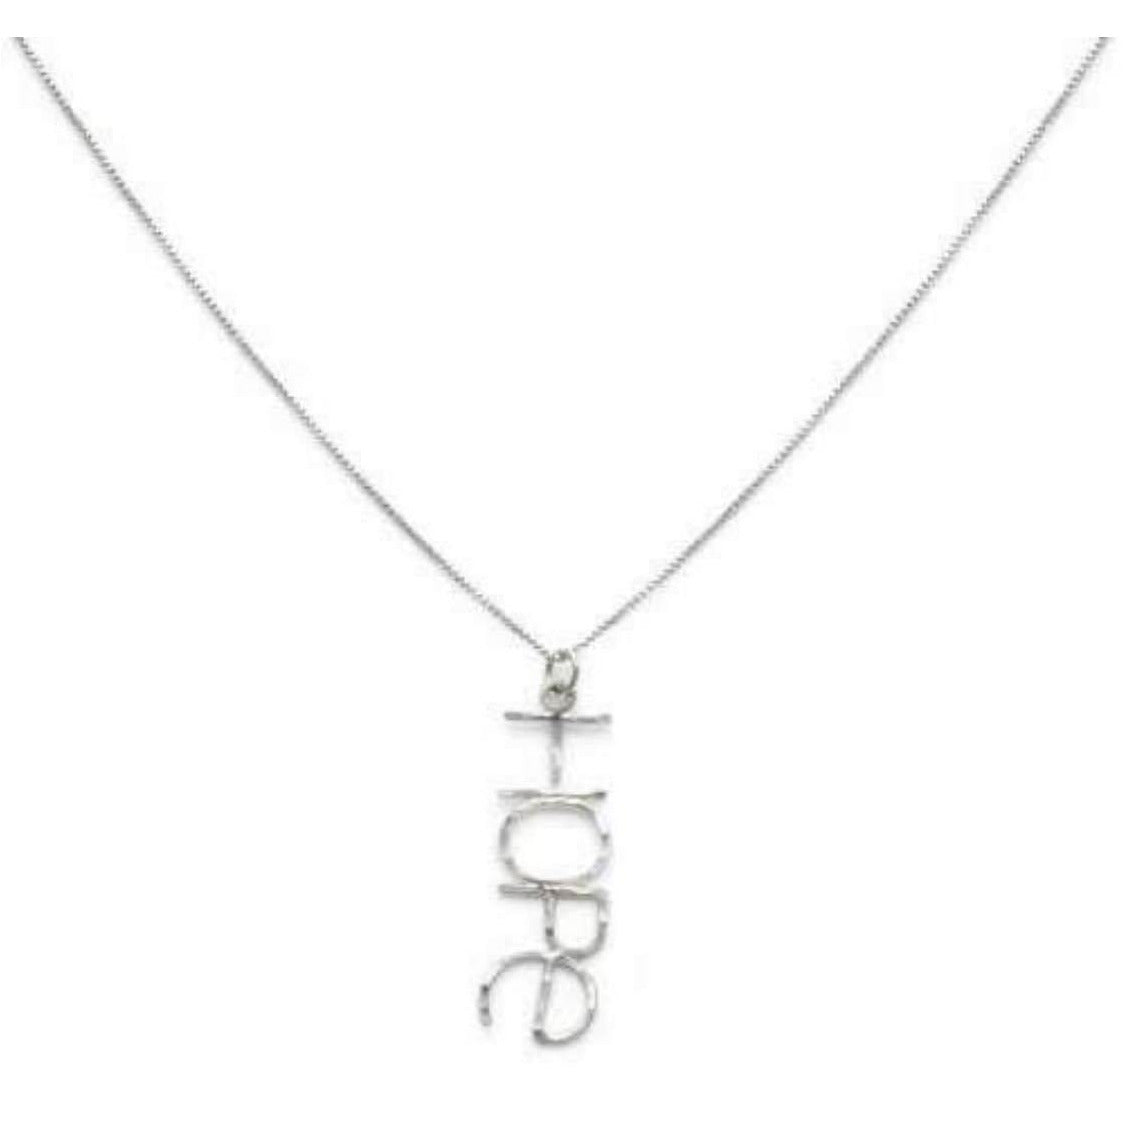 Handmade Sterling Silver ‘HOPE’ Necklace - Camille Bryanne